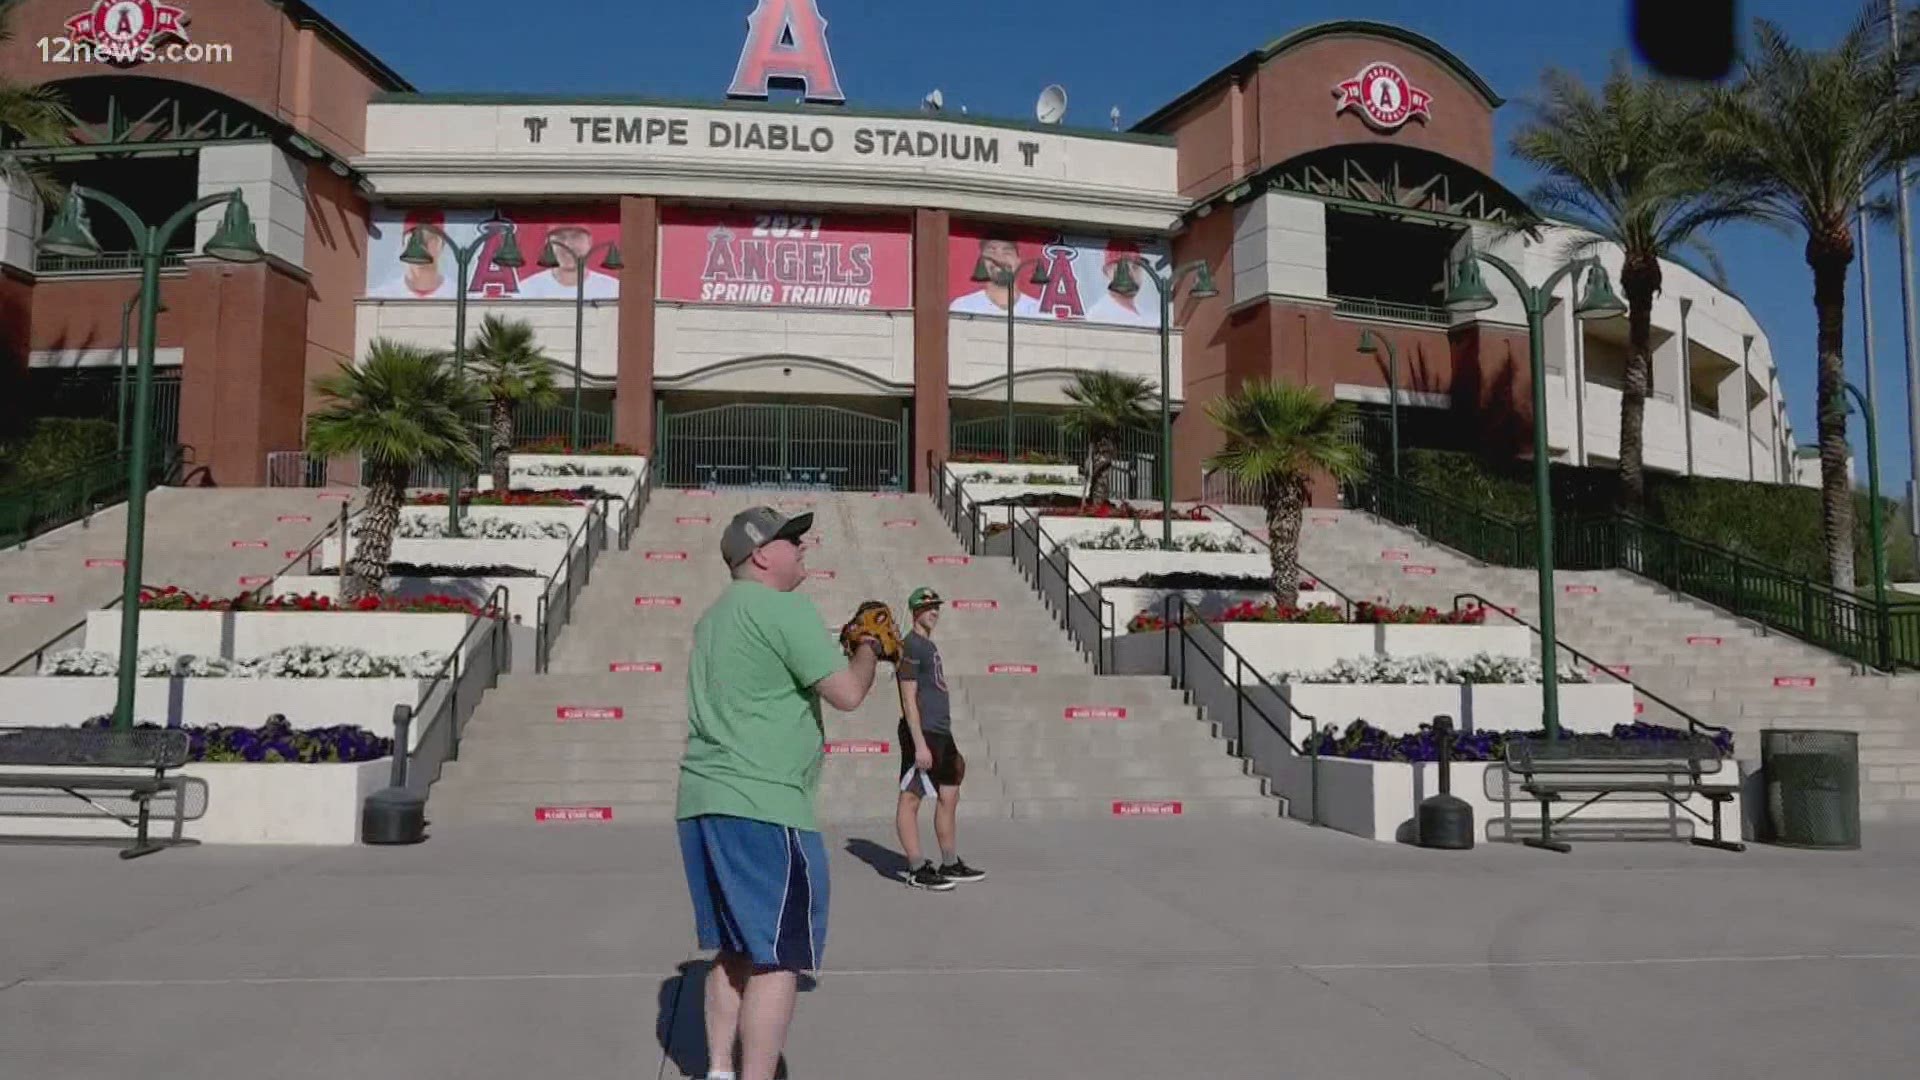 Spring training games will be starting on Sunday in the Valley. Fans are allowed back in, but just like so many things nowadays, COVID is changing how it will look.